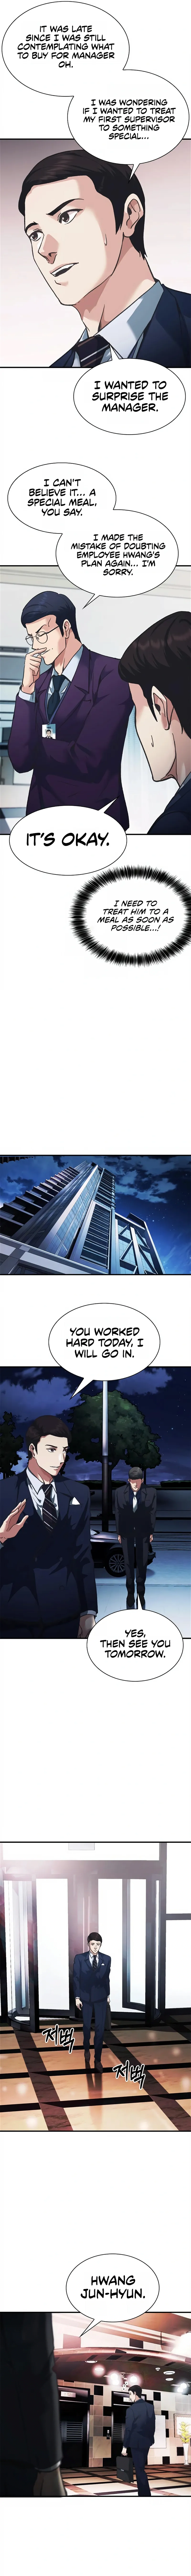 Chairman Kang: The Newcomer Chapter 23 page 14